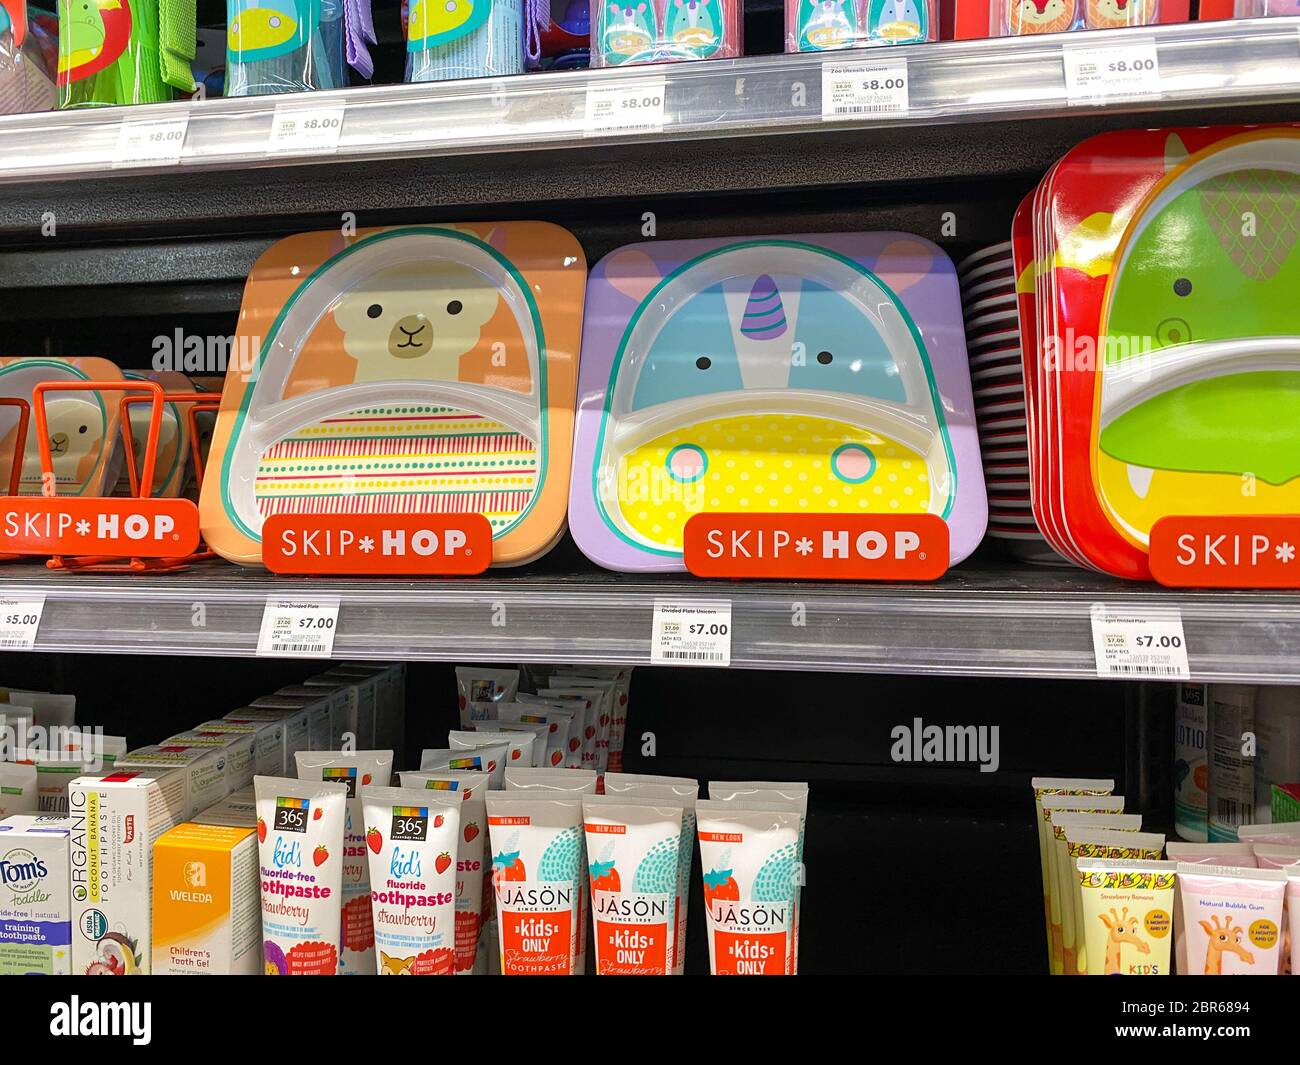 https://c8.alamy.com/comp/2BR6894/orlandoflusa-5320-a-display-of-various-childrens-plates-and-utensils-in-the-baby-department-of-a-whole-foods-market-grocery-store-2BR6894.jpg